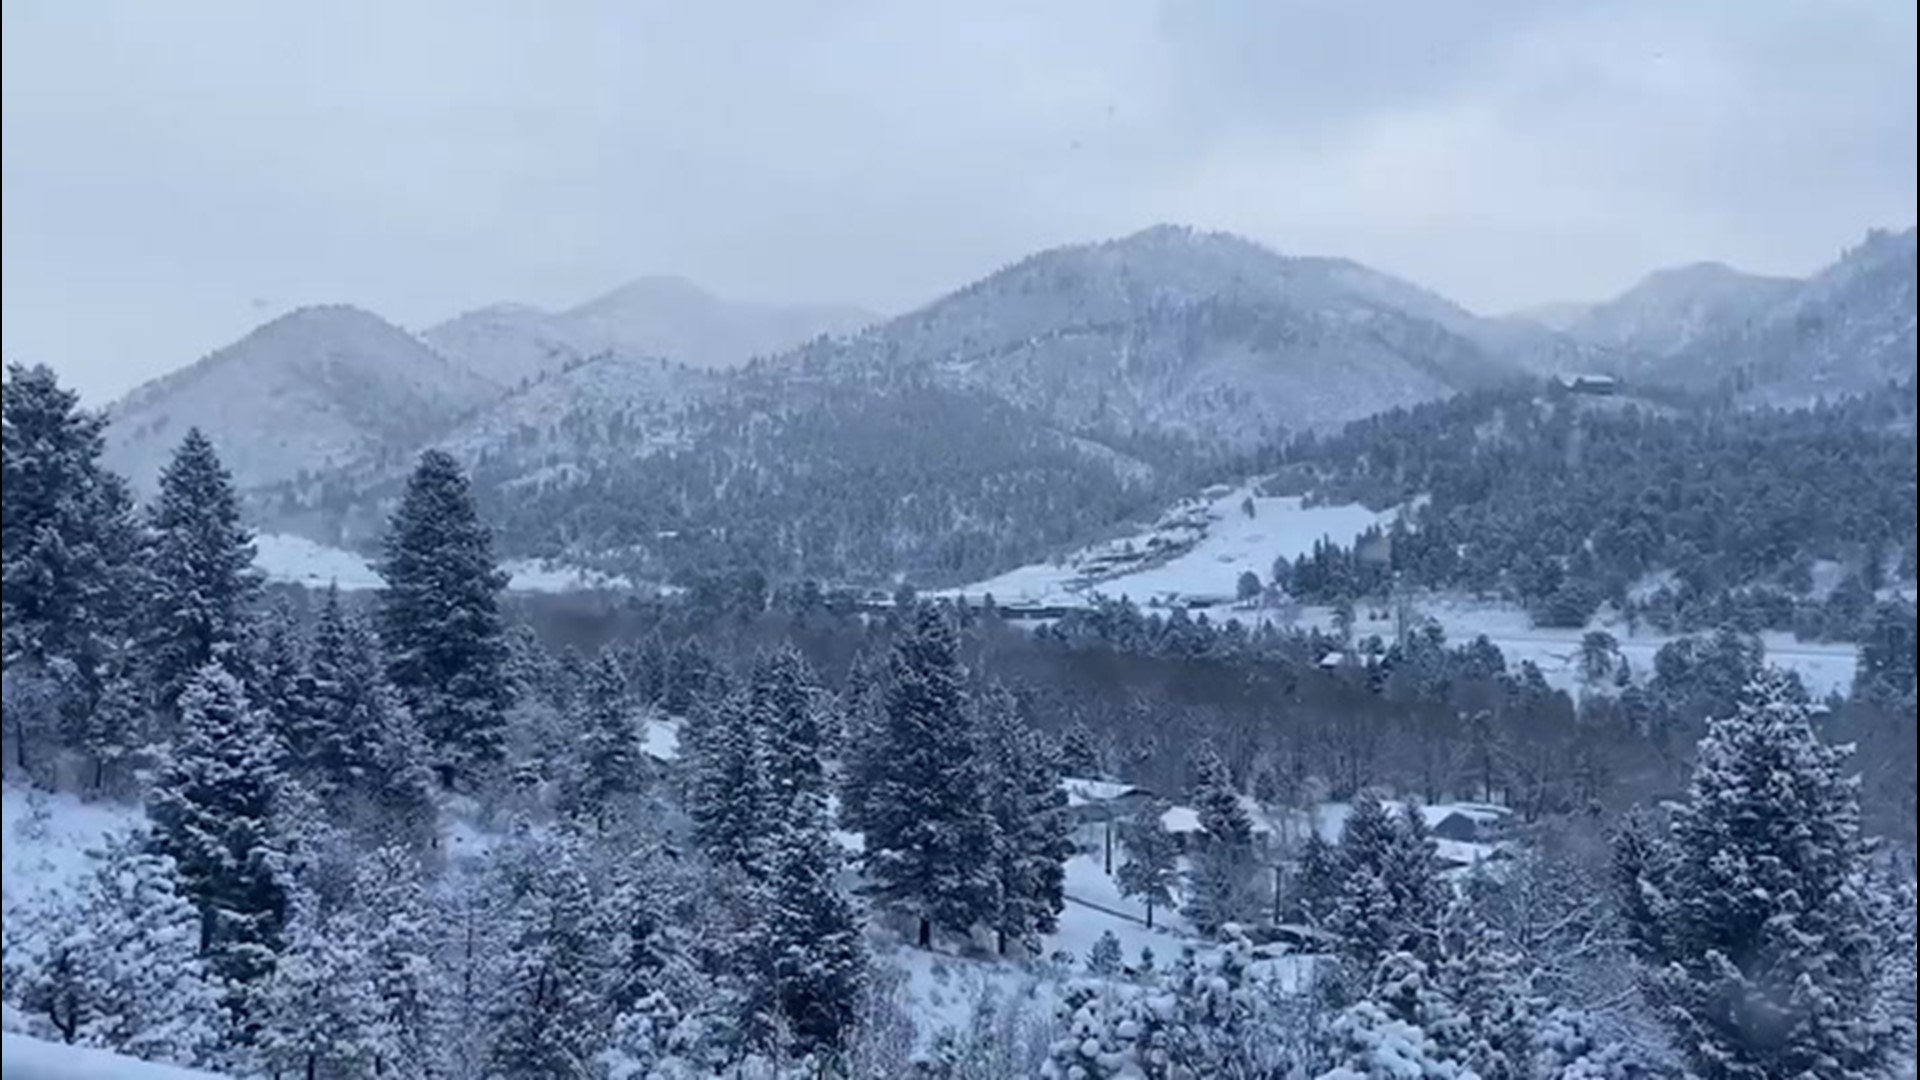 As much as this winter wonderland looks stunning, this video was shot in Cascade, Colorado, on April 3. People may be looking forward to spring now.